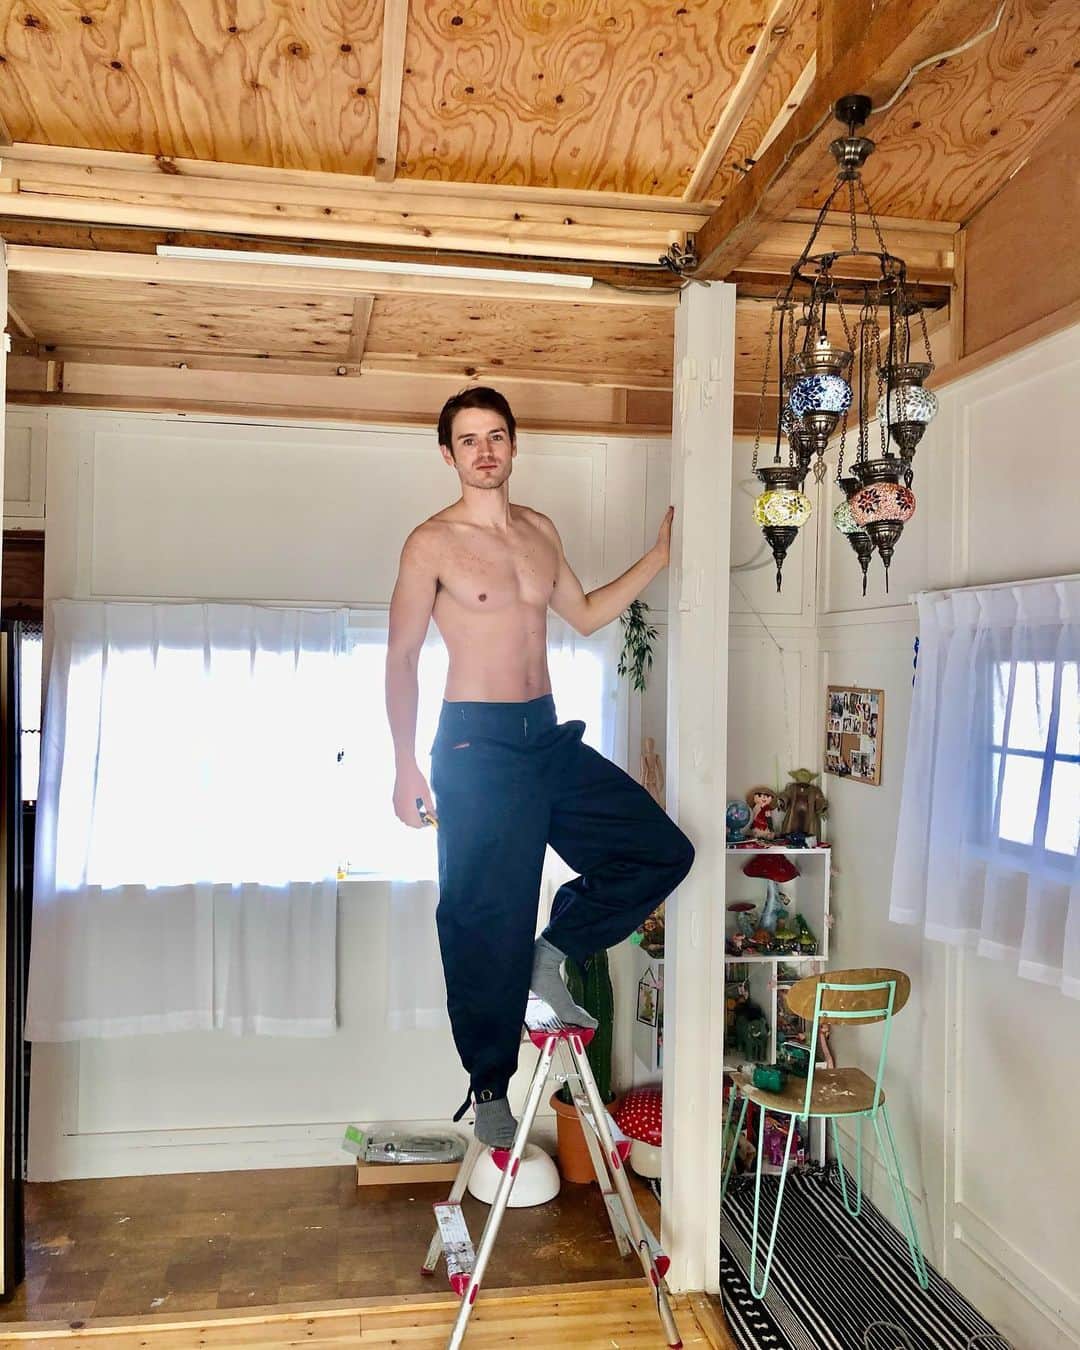 Anton Wormannのインスタグラム：「Sorry for not spamming with DIY lately, been busy with life! 🙏 Also I MOVED in! ❤️🏡 A little update from the second floor, putting up new christmas lights 🎄💡 this used to be a traditional 6-mat Tatami-room with walls all around it. Also took away the lower ceiling and insulated the roof 🙆‍♂️🎌happy with my 4m up to the ridge 💥🔨  最近仕事が忙しかったからDIYのこと全然アップしてなくてごめんなさい🙏　この部屋は元々畳の部屋で、壁も天井も壊してて、こういう風に作りました！　日当たりがすごく良くなりました☀️　#DIY #JAPAN #東京　#三軒茶屋#Sancharepublik #Bradderhq #クリスマス　＃木材　#ワークマン　#workmanplus #Workman」